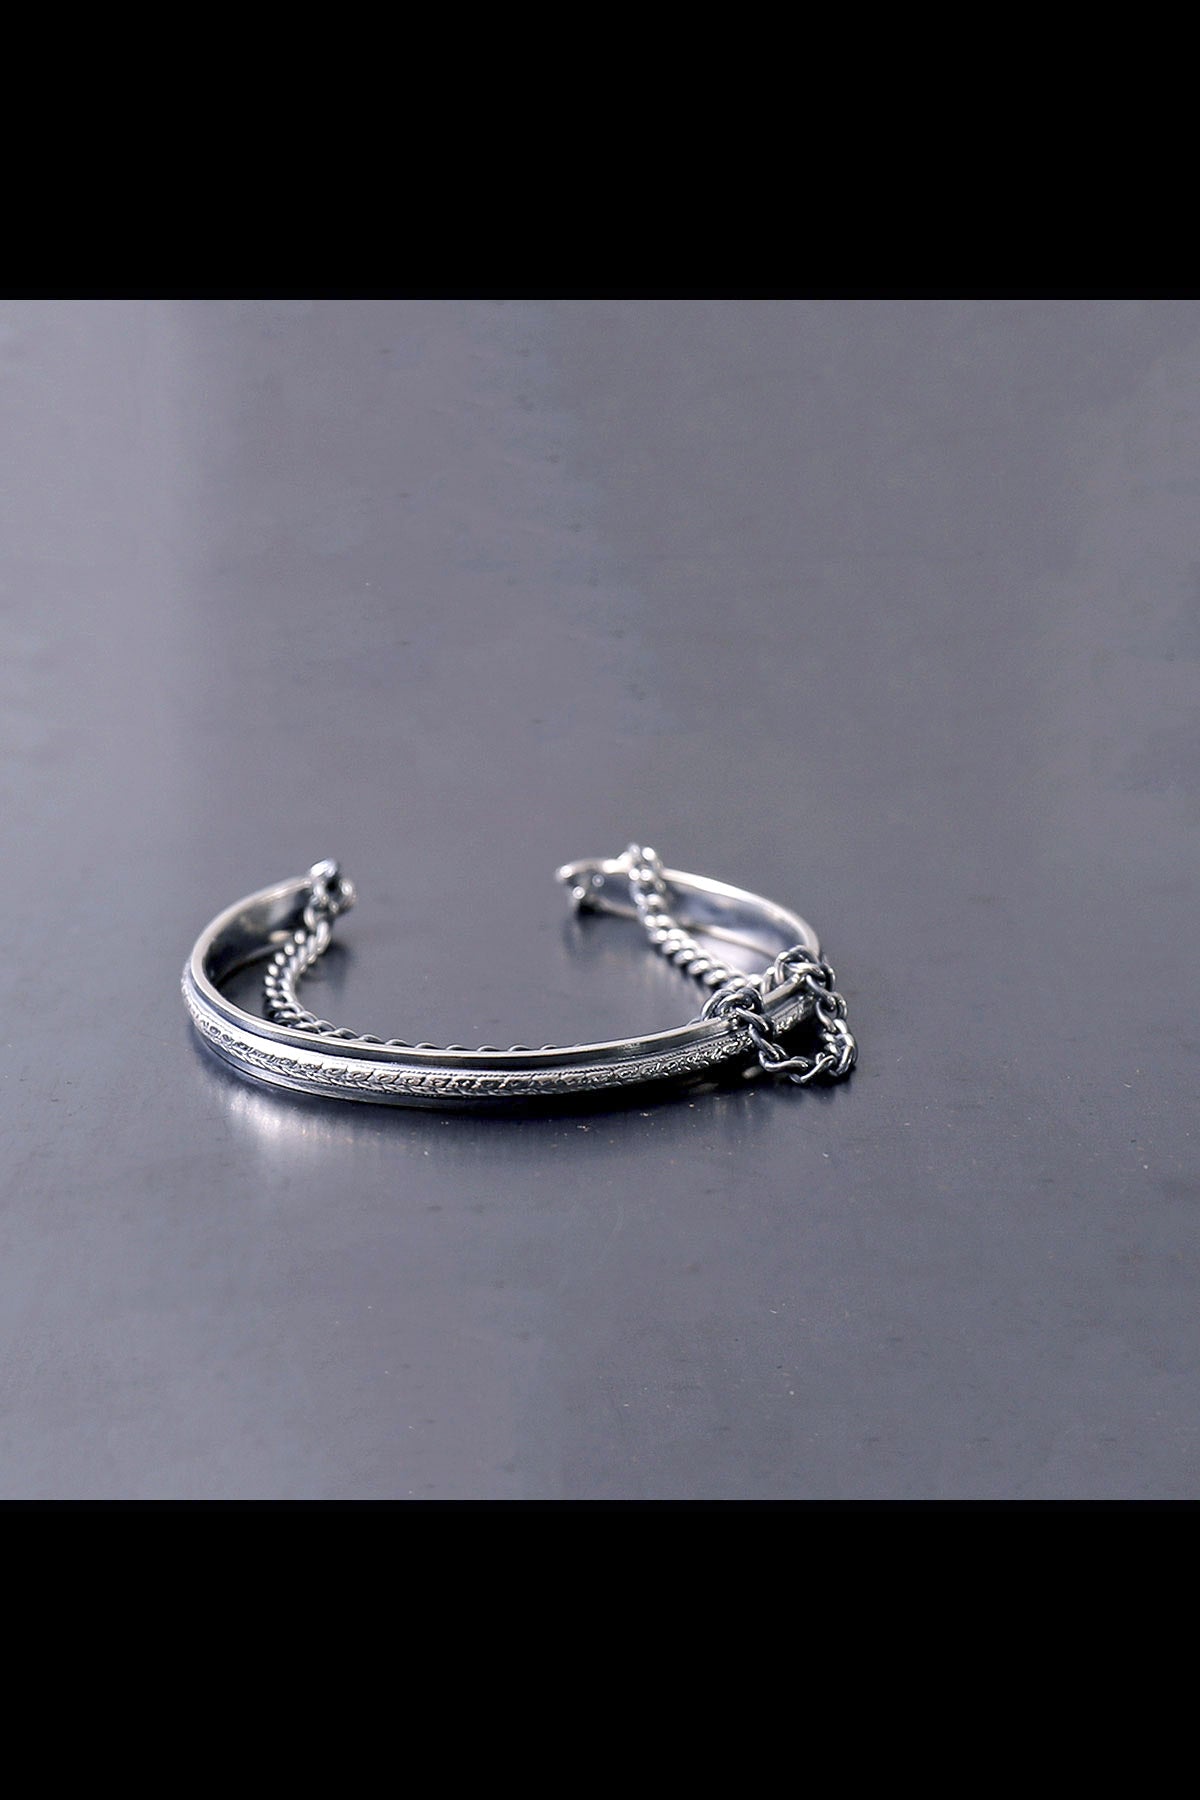 【Rusty Thought】 ENGLAVED SILVER BANGLE &amp; CUFF CHAIN_WCB4_M